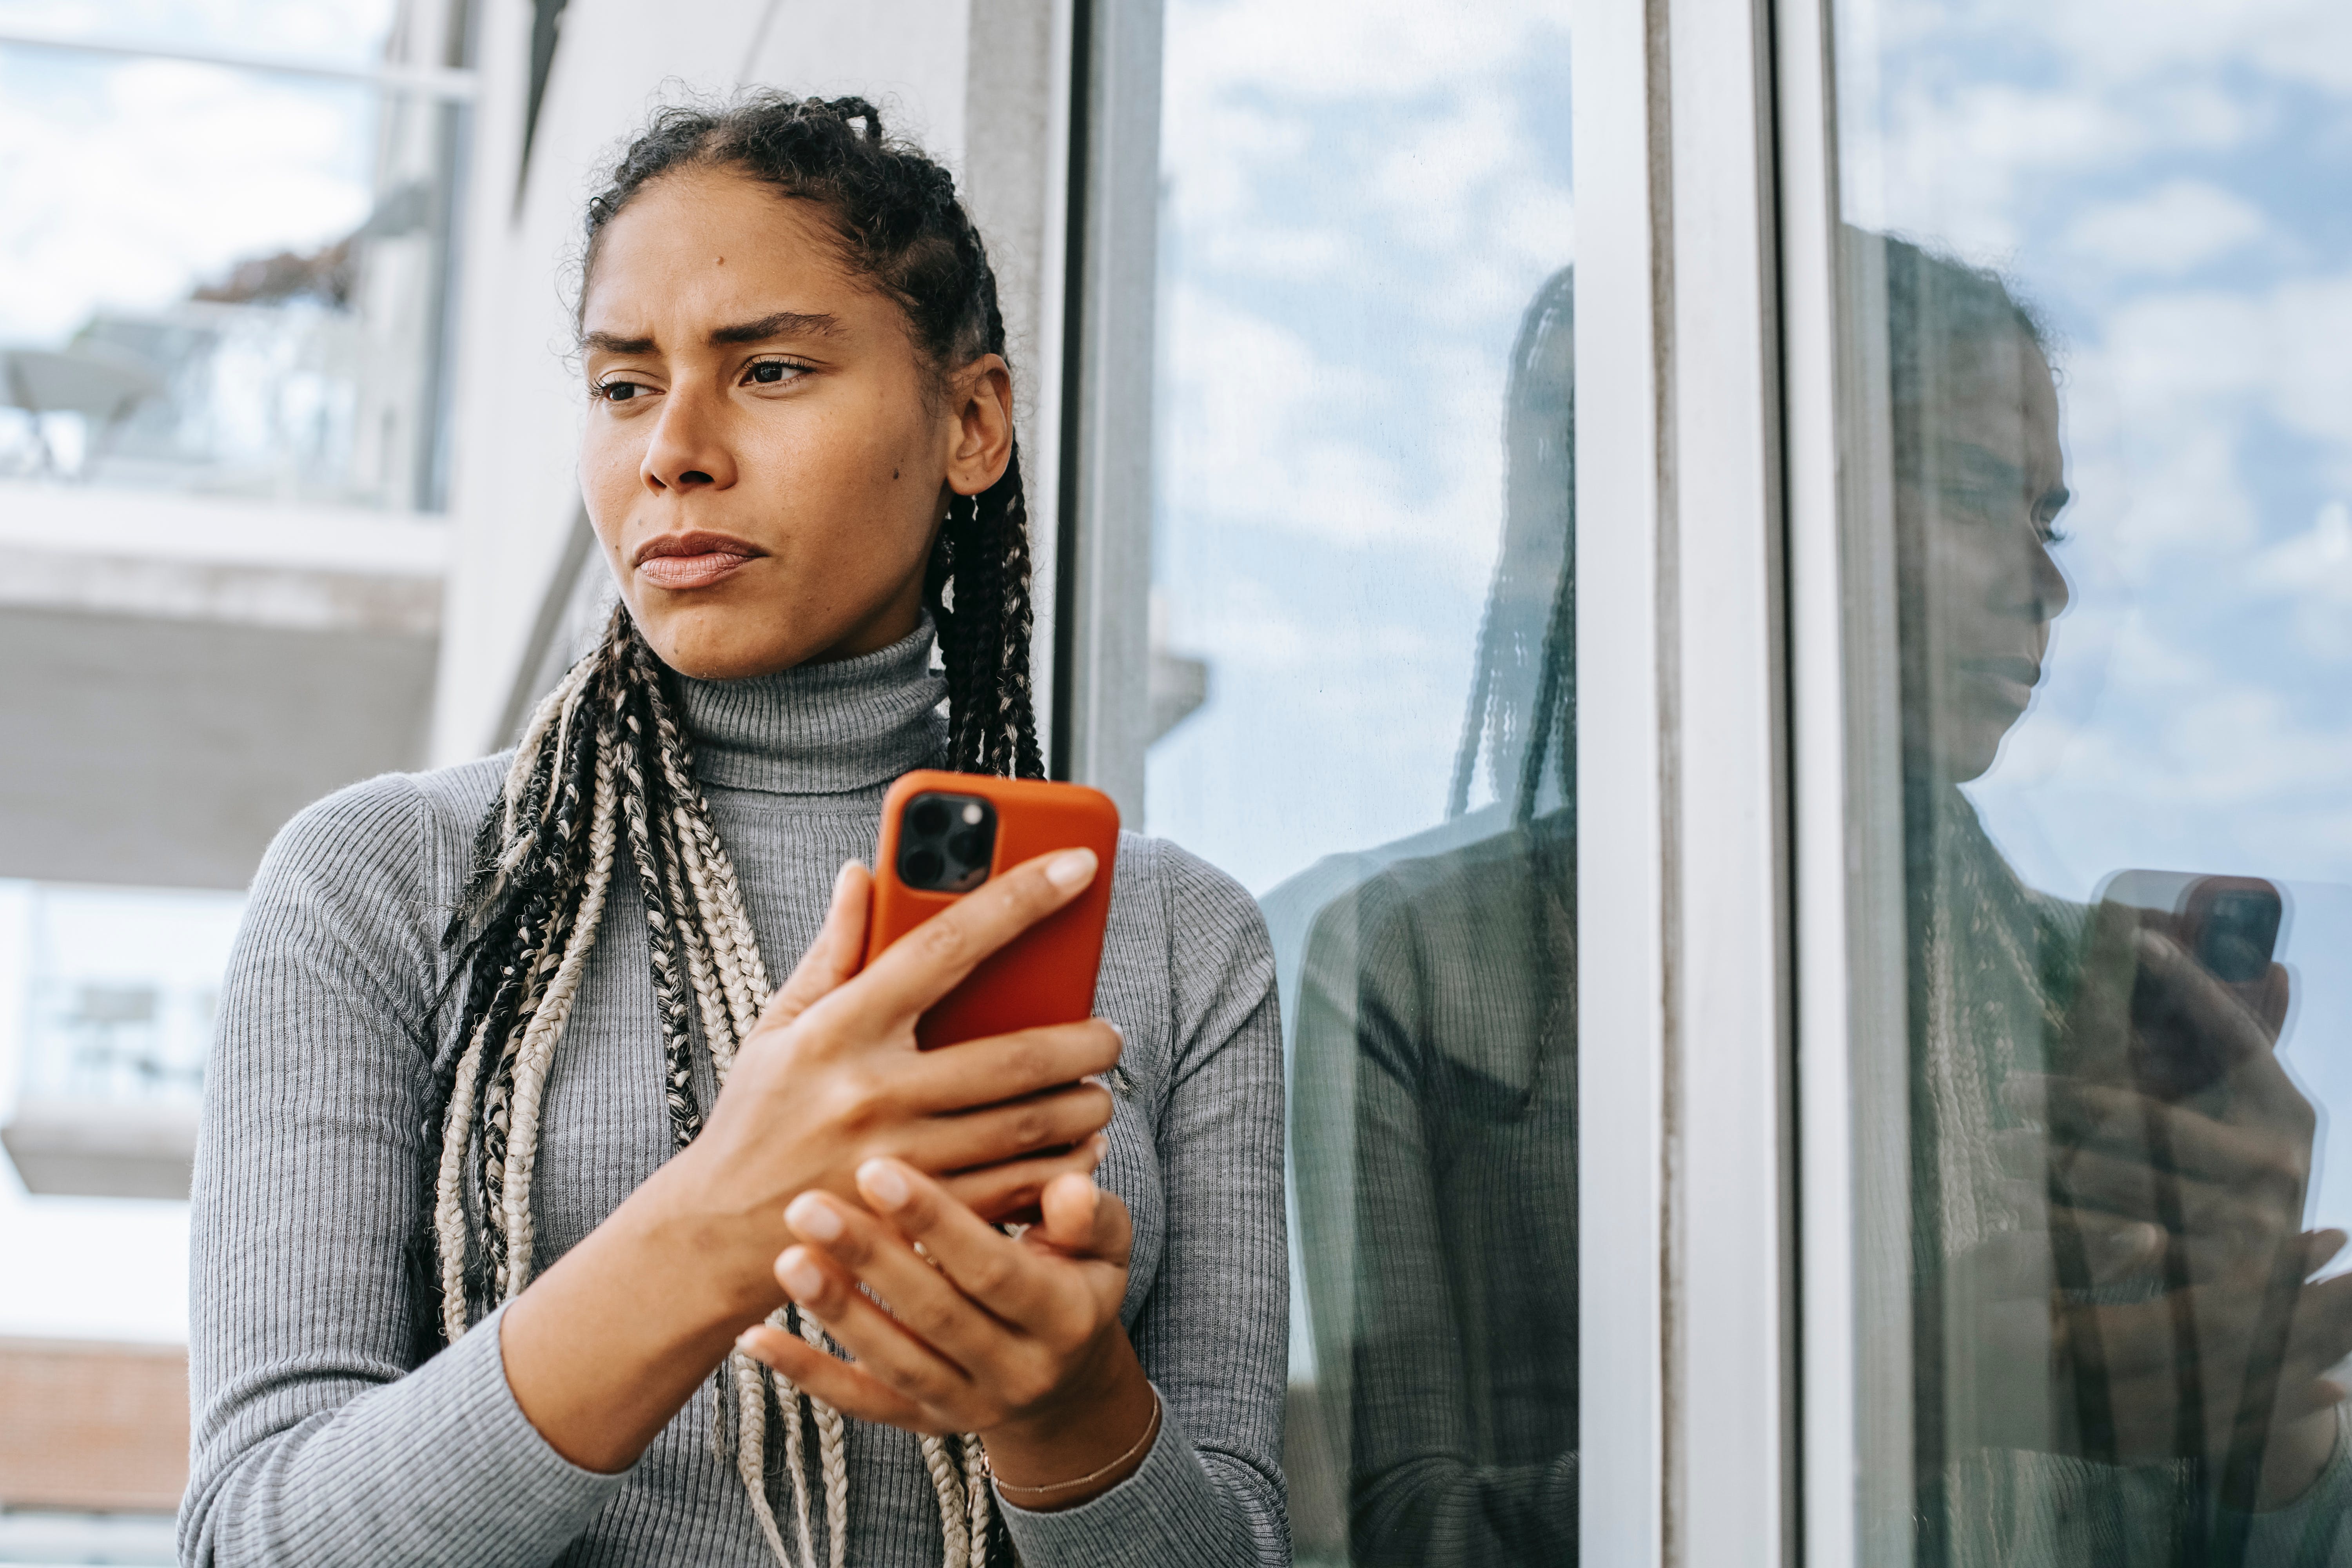 A an upset looking woman looking outside while holding a phone | Source: Pexels